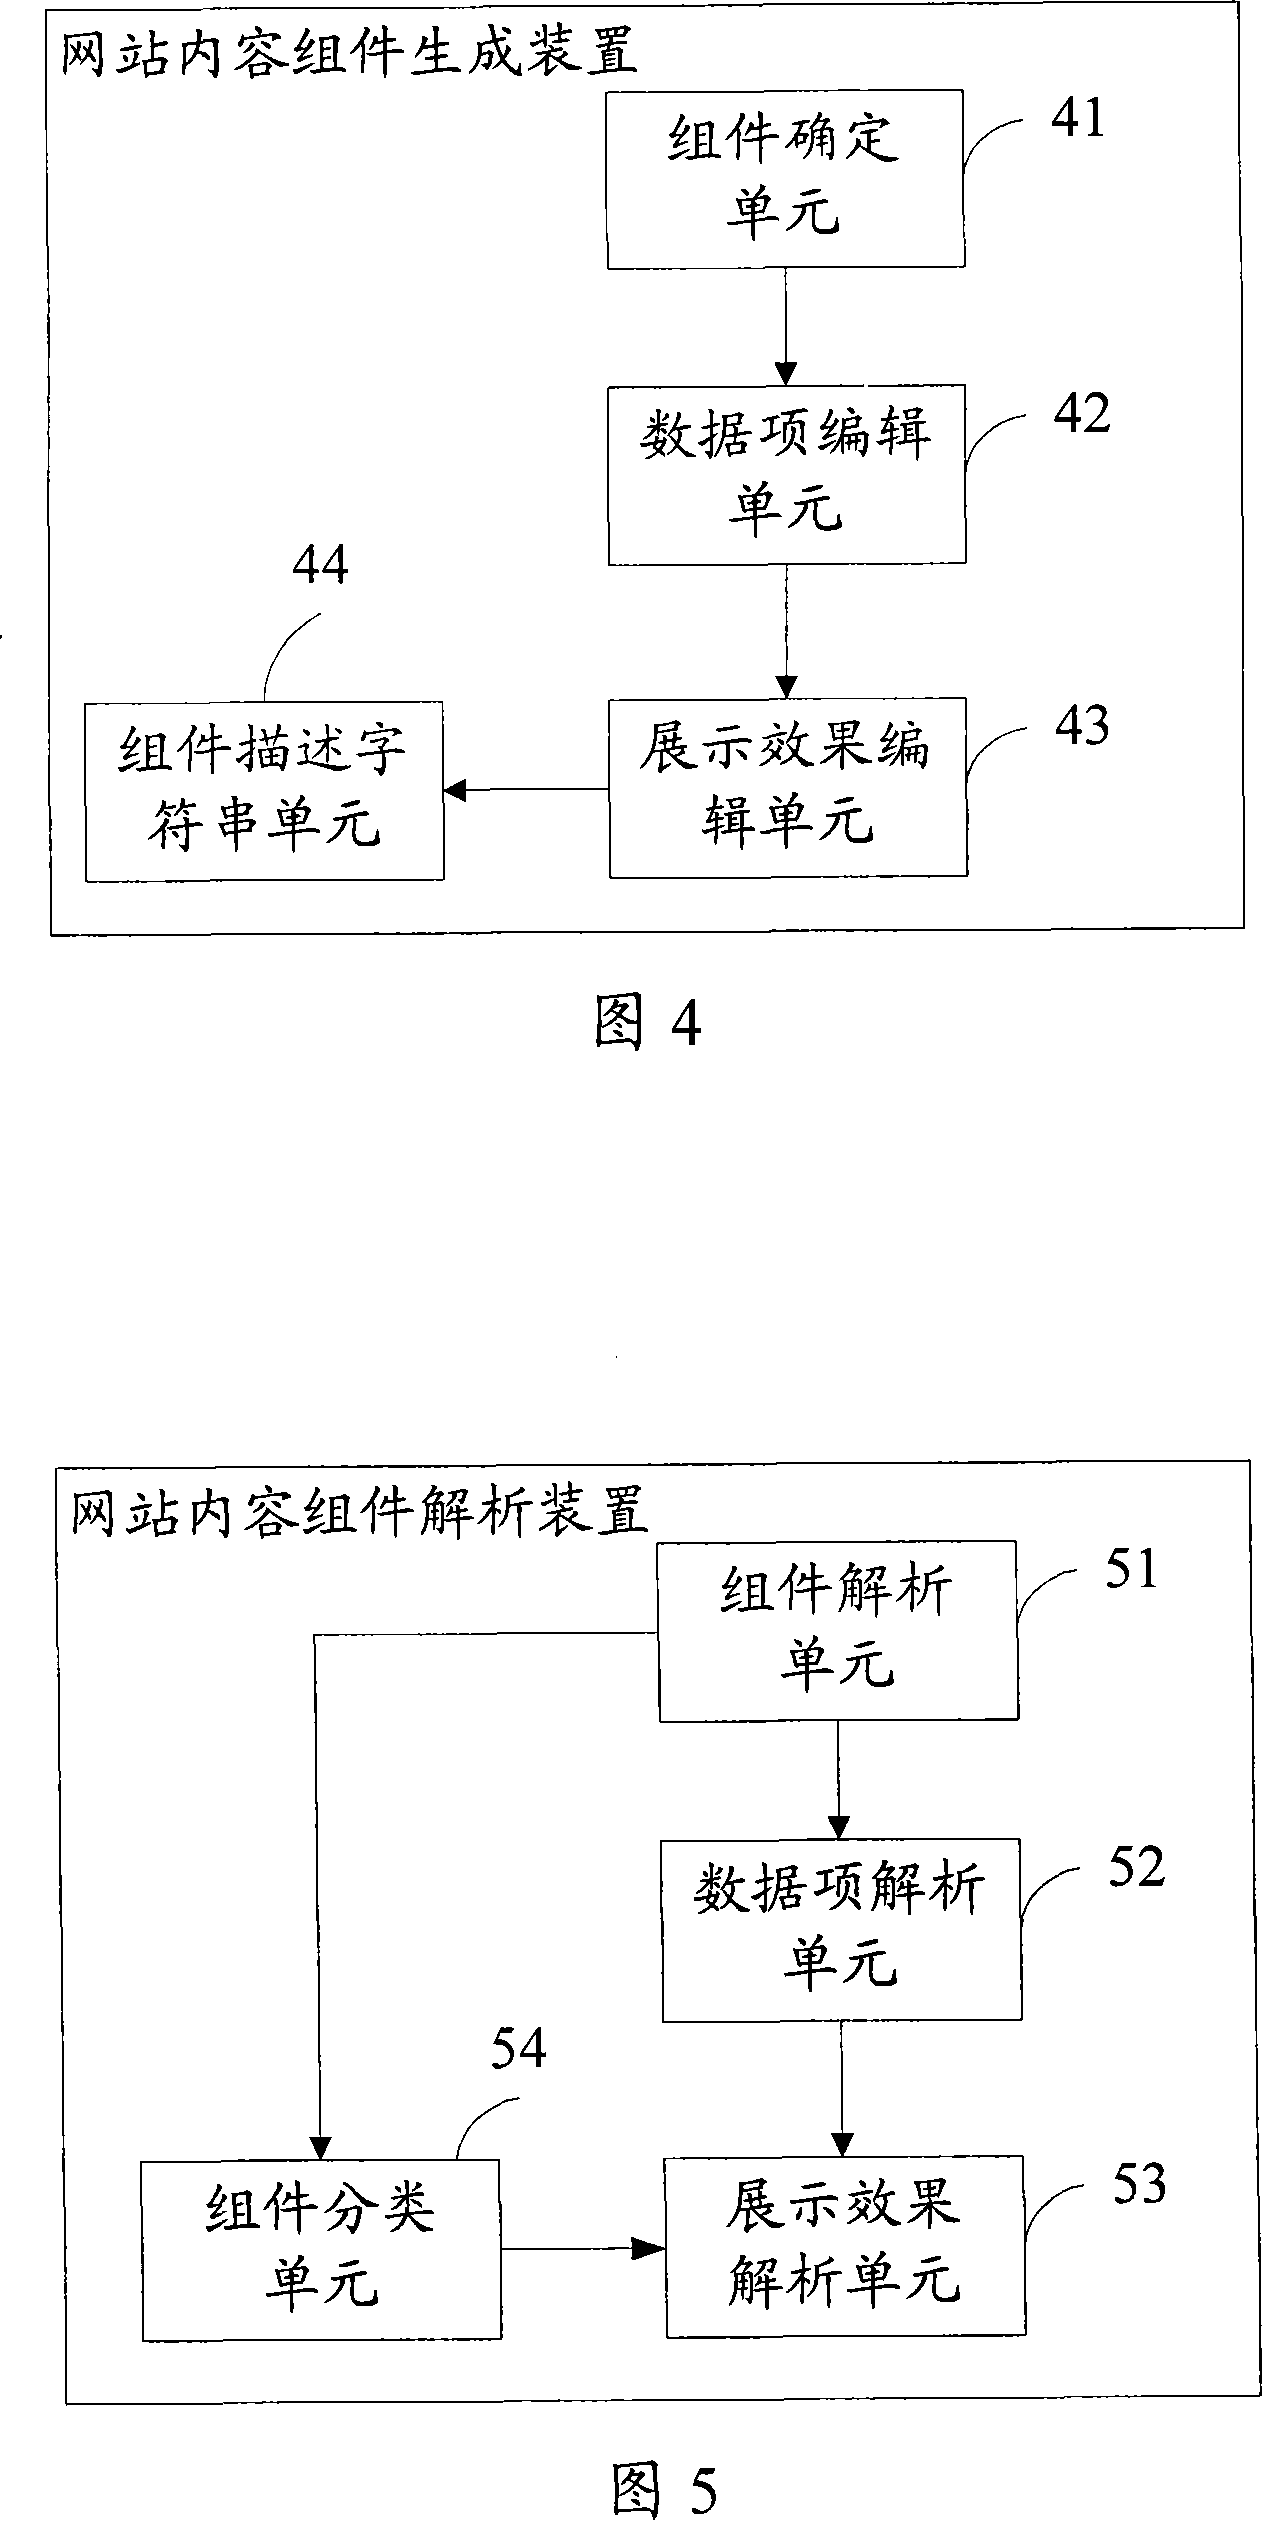 Method for generating and analyzing website content components as well as apparatus